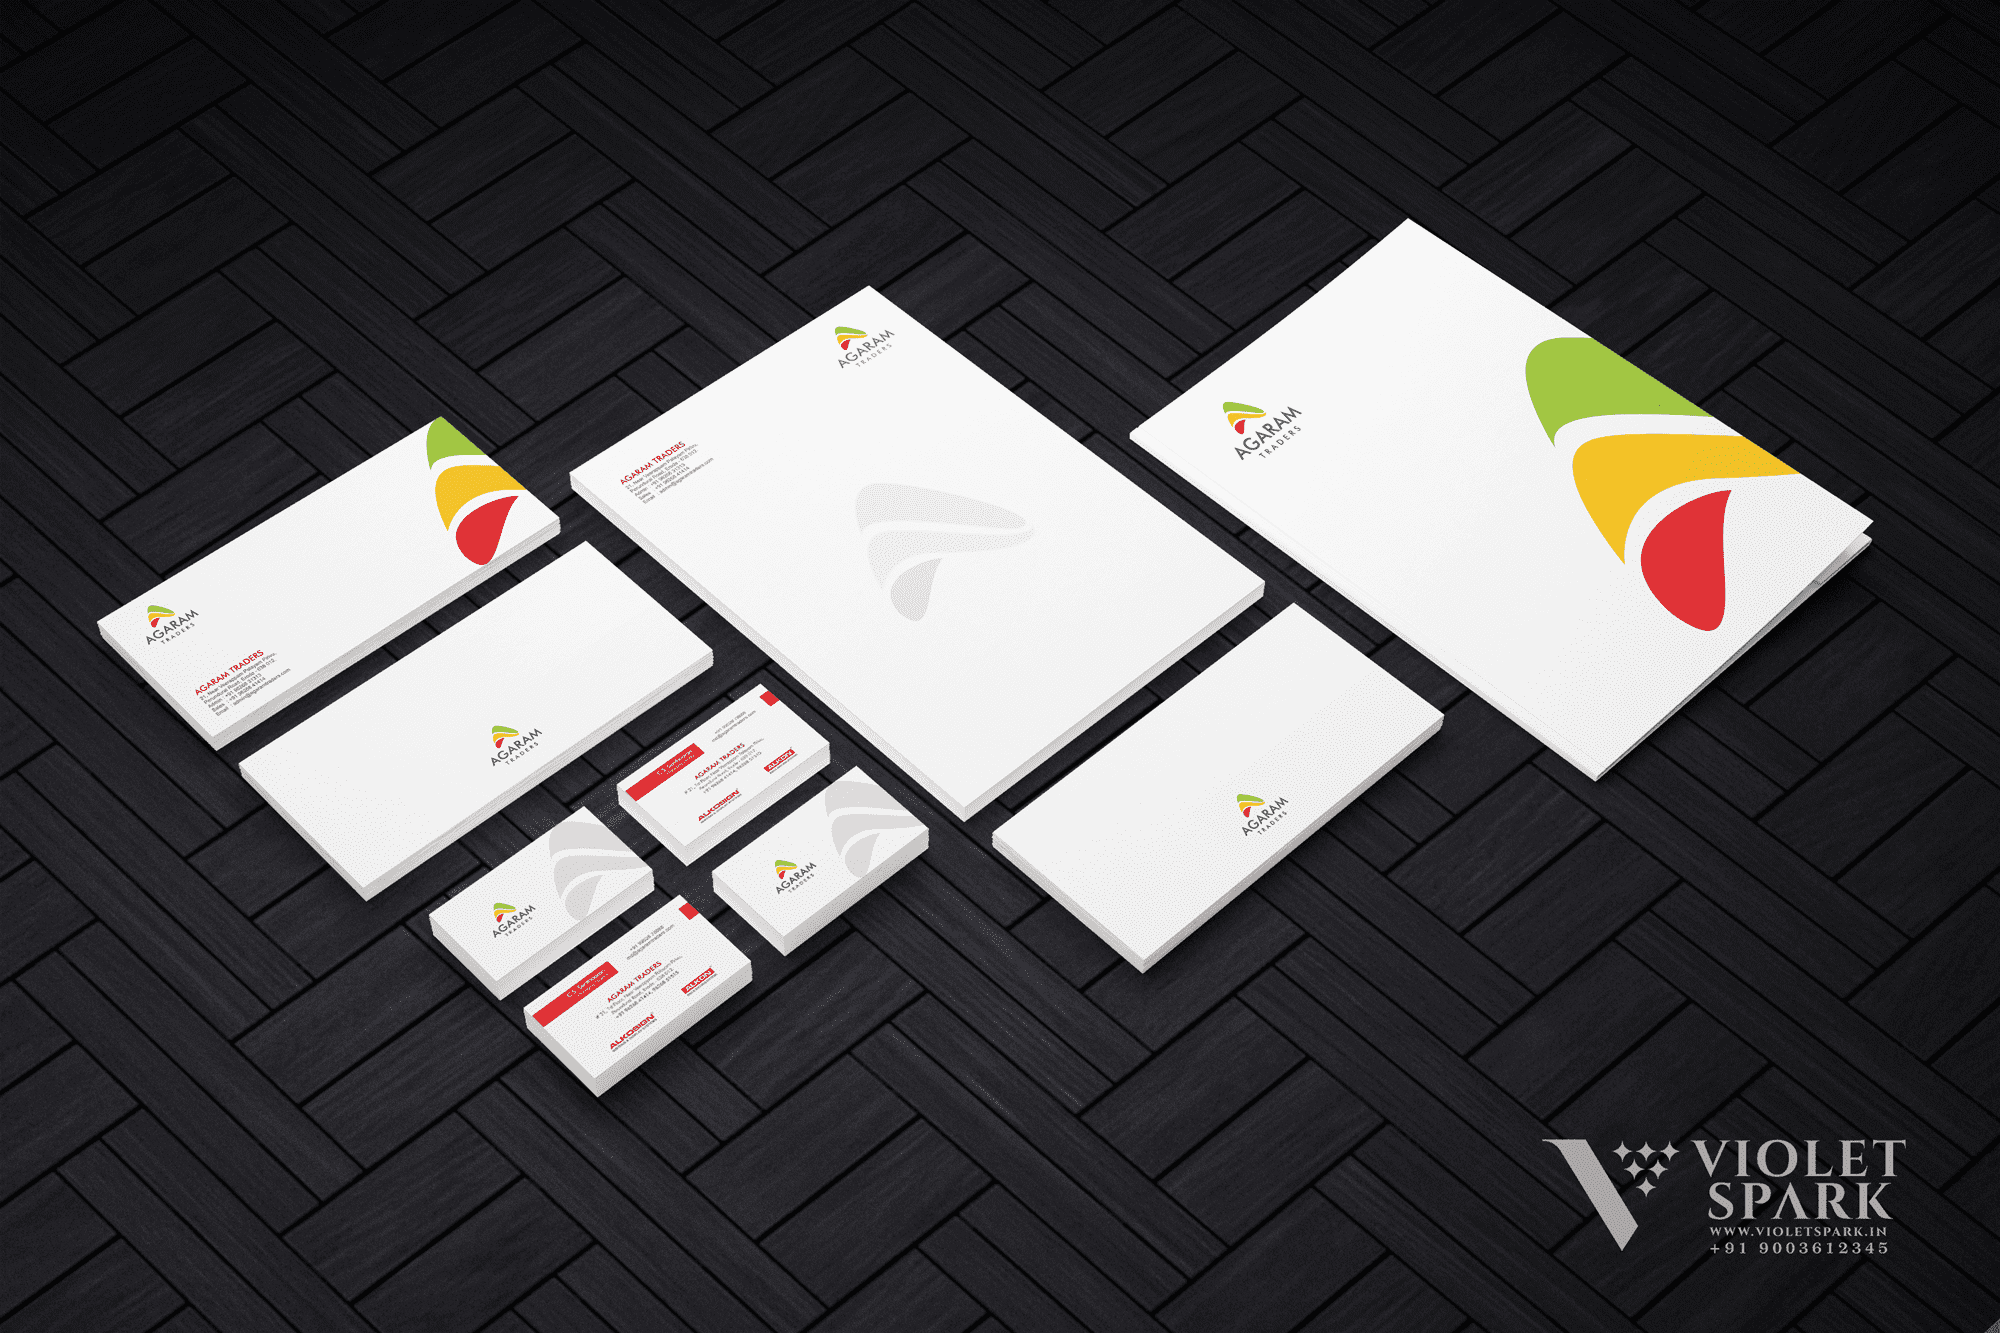 Agaram Traders Stationary Set Branding & Packaging Design in Chennai by Creative Prints thecreativeprints